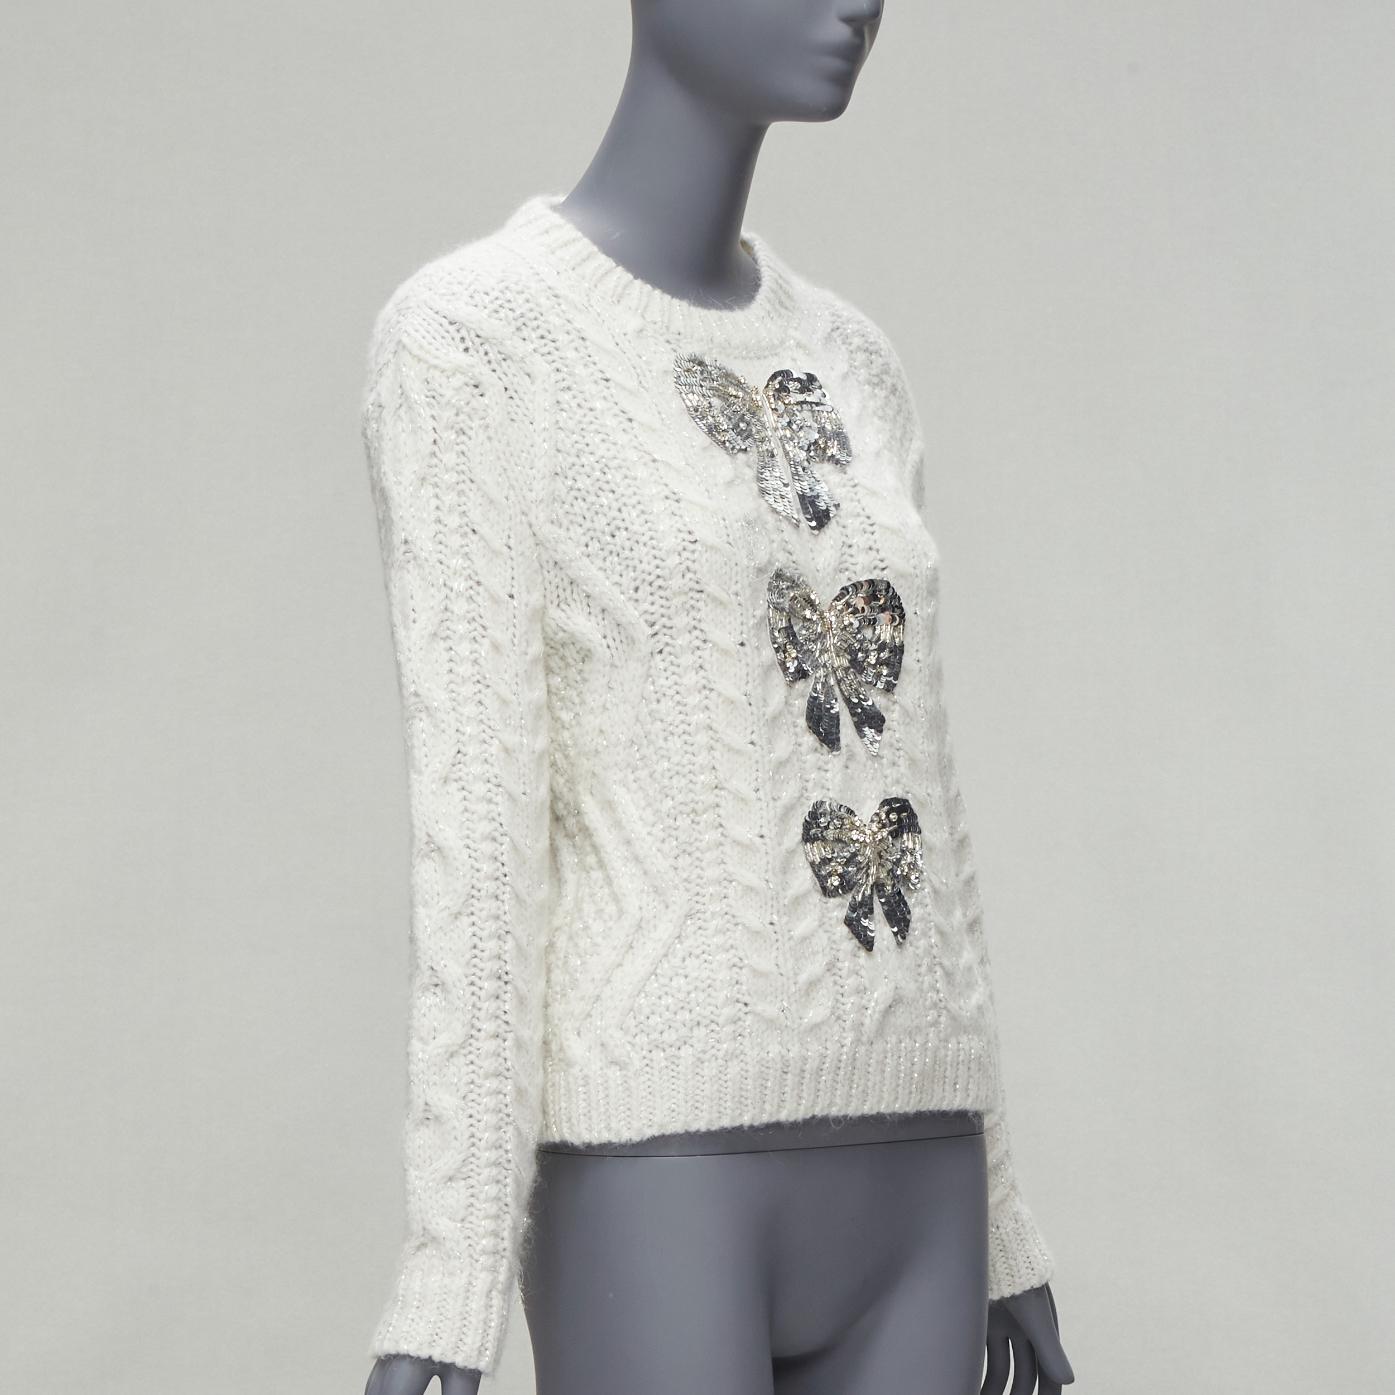 VALENTINO 2021 silver beads sequins bow white lurex cable knit sweater XS
Reference: AAWC/A00474
Brand: Valentino
Designer: Pier Paolo Piccioli
Collection: 2021
Material: Acrylic, Mohair, Blend
Color: White, Silver
Pattern: Solid
Closure: